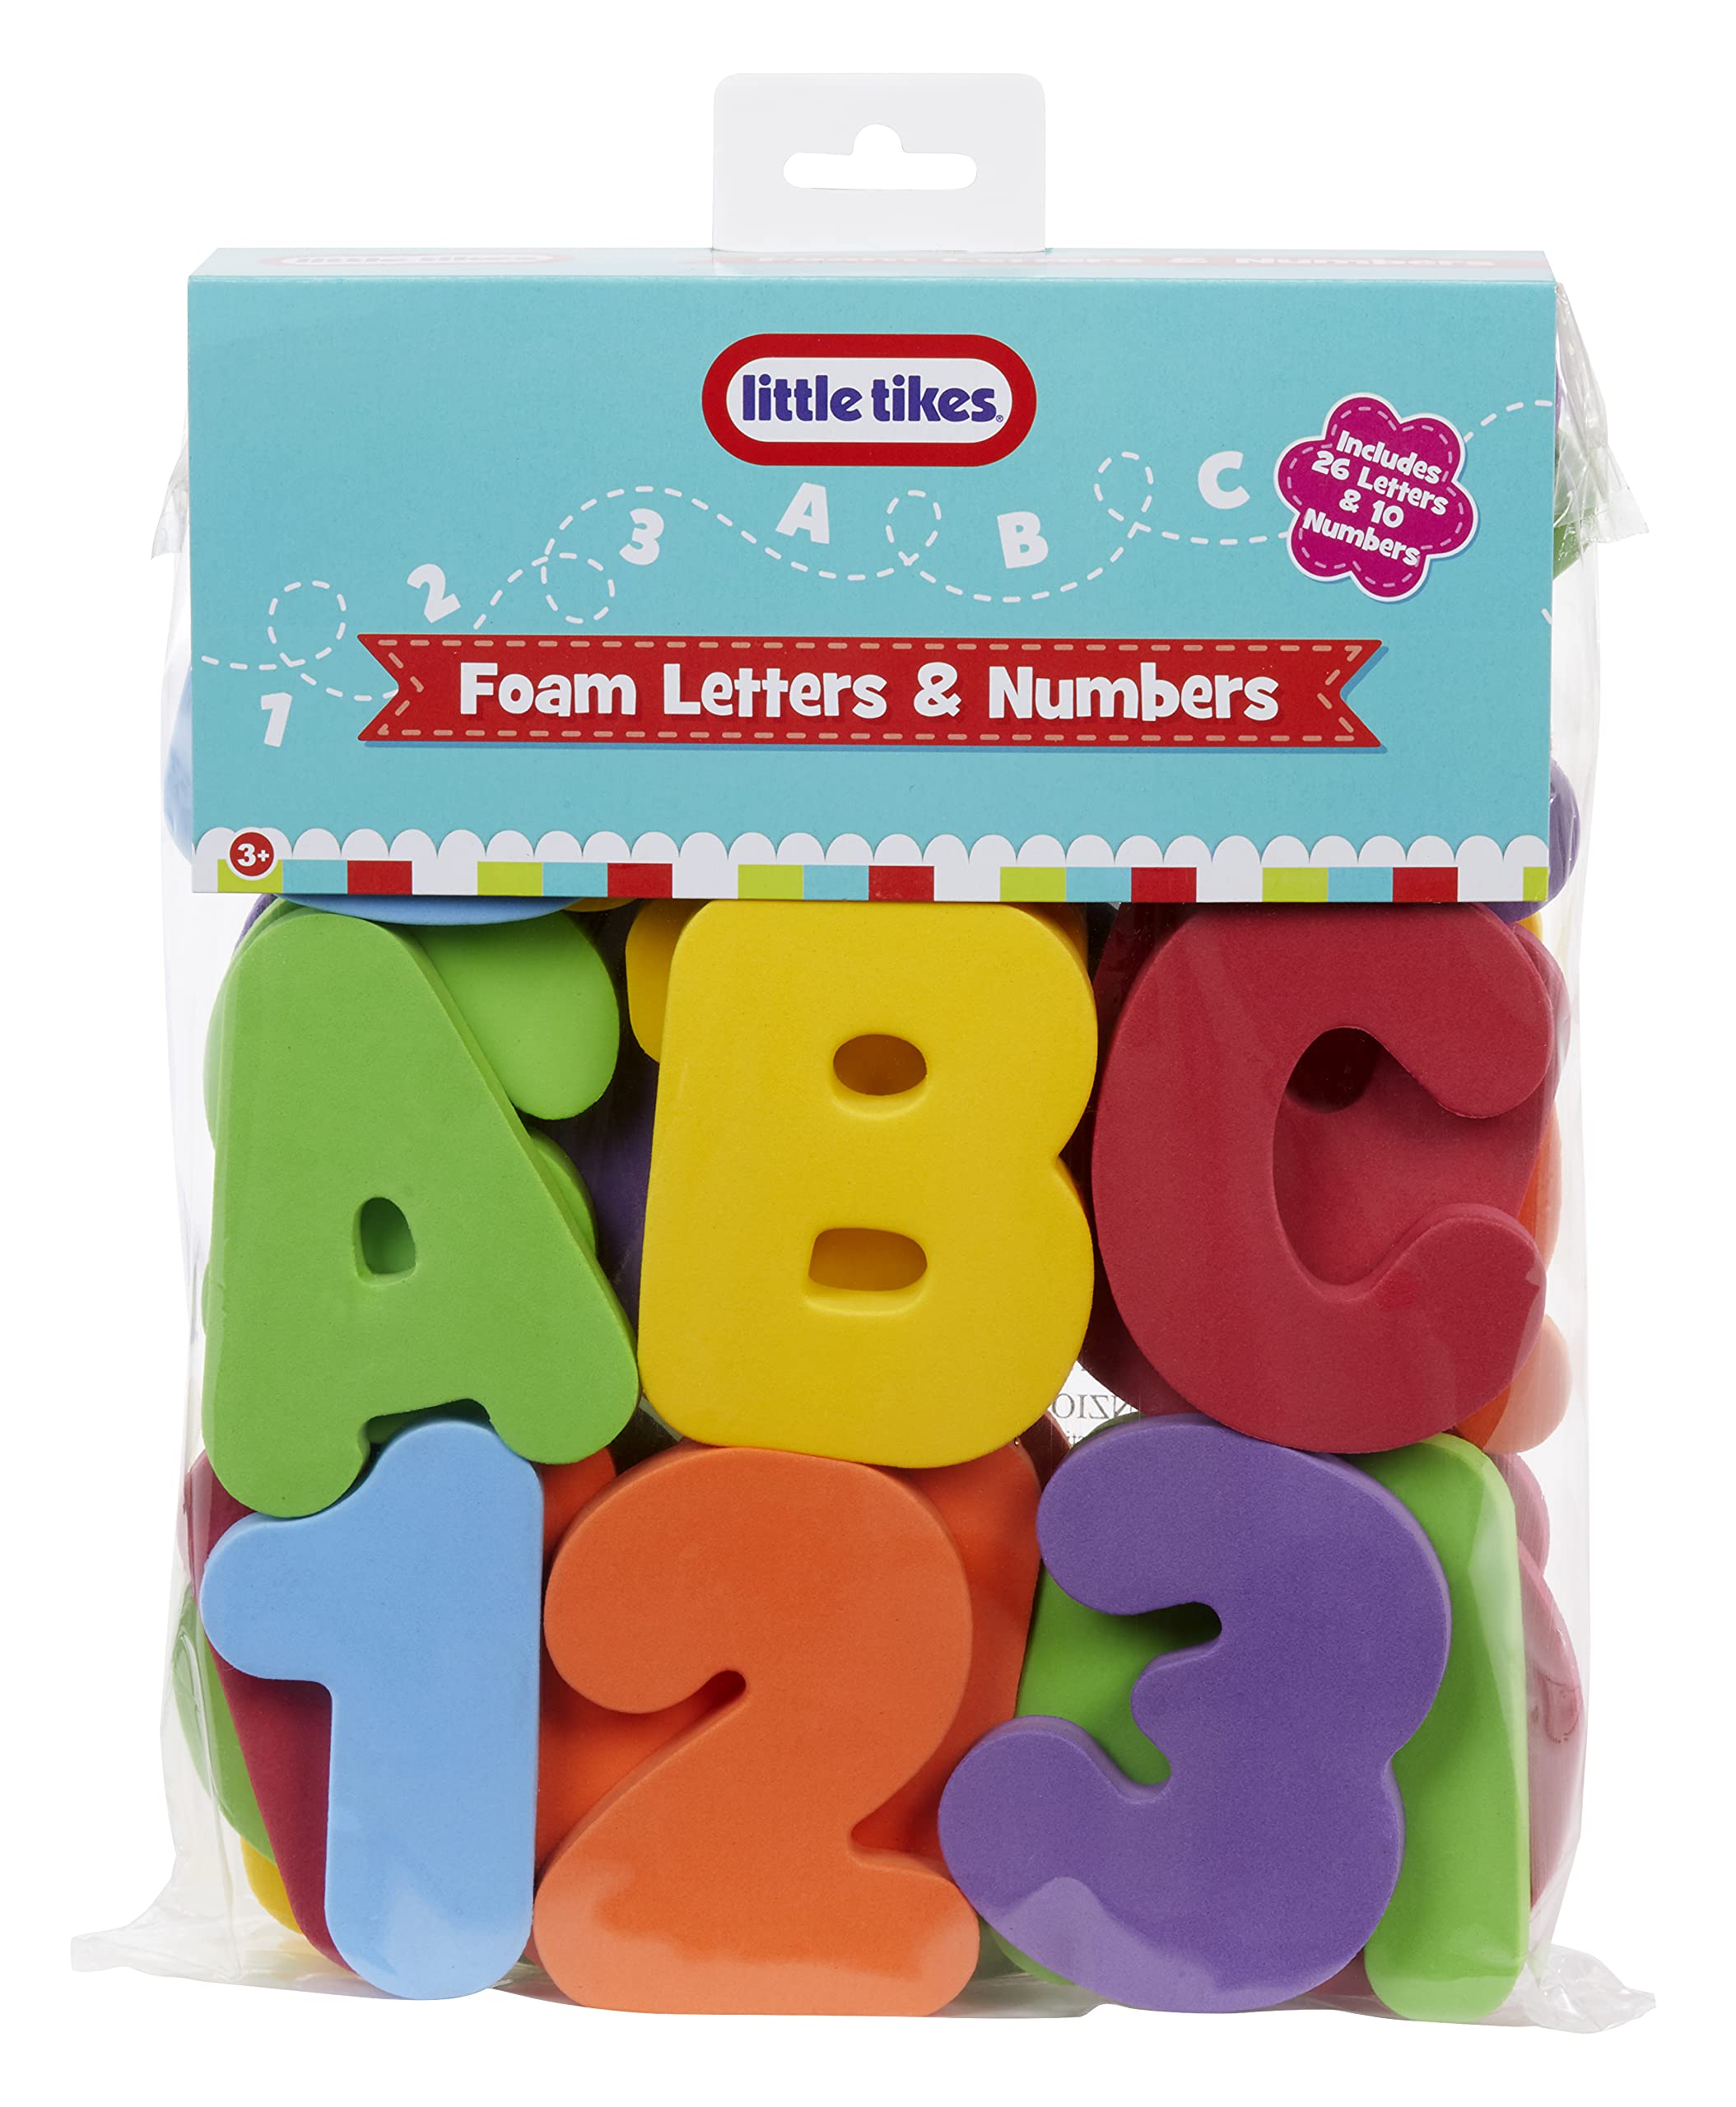 Little Tikes® Foam Letters & Numbers, 36 Count, Educational Alphabet Counting Colorful Kids Children Girls Boys Ages 3+